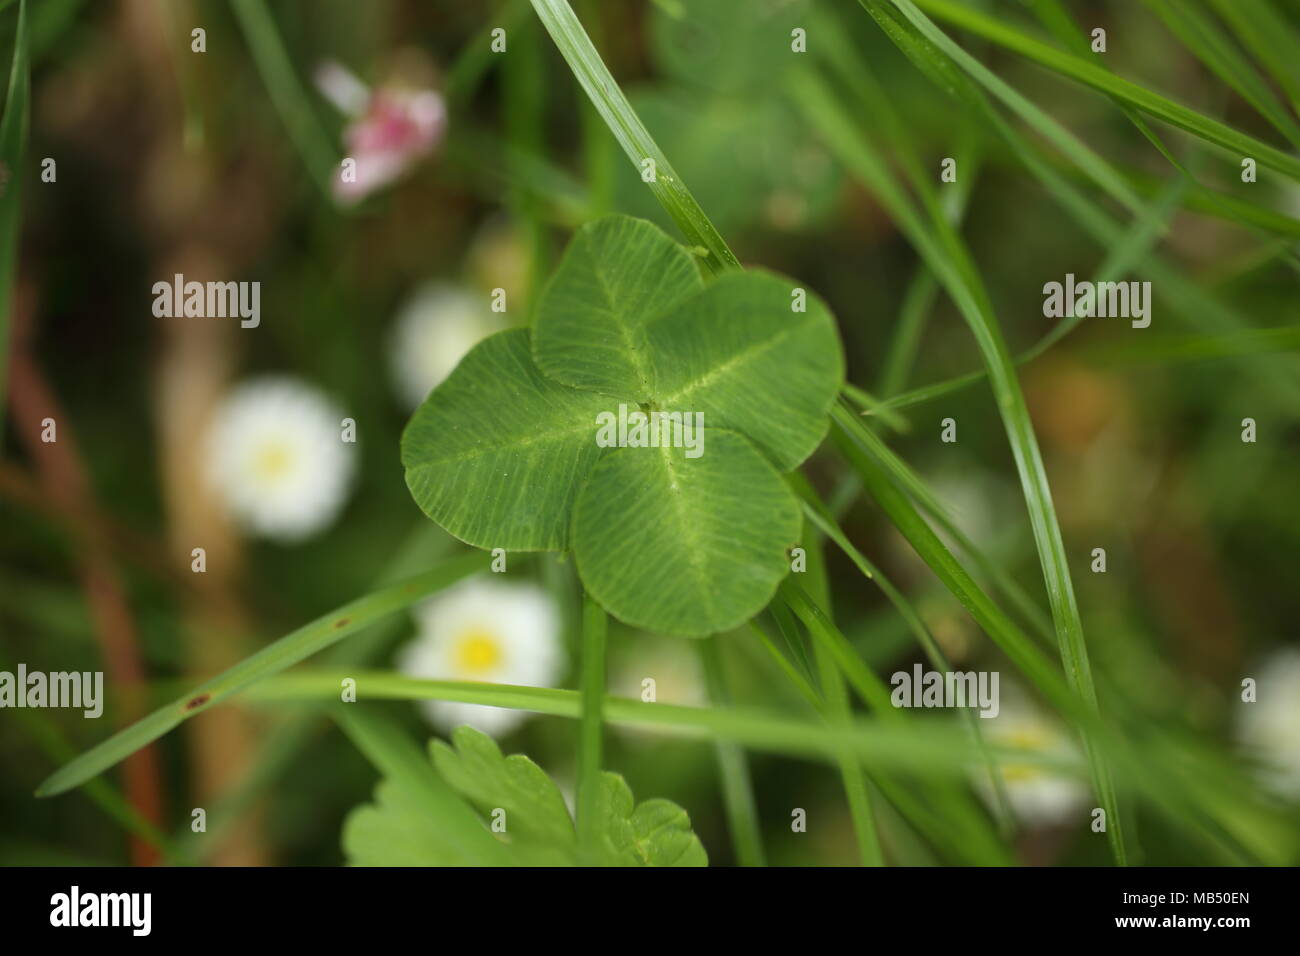 Close-up of Four-leaf Water Clover or Clover Fern,in the grass Stock Photo